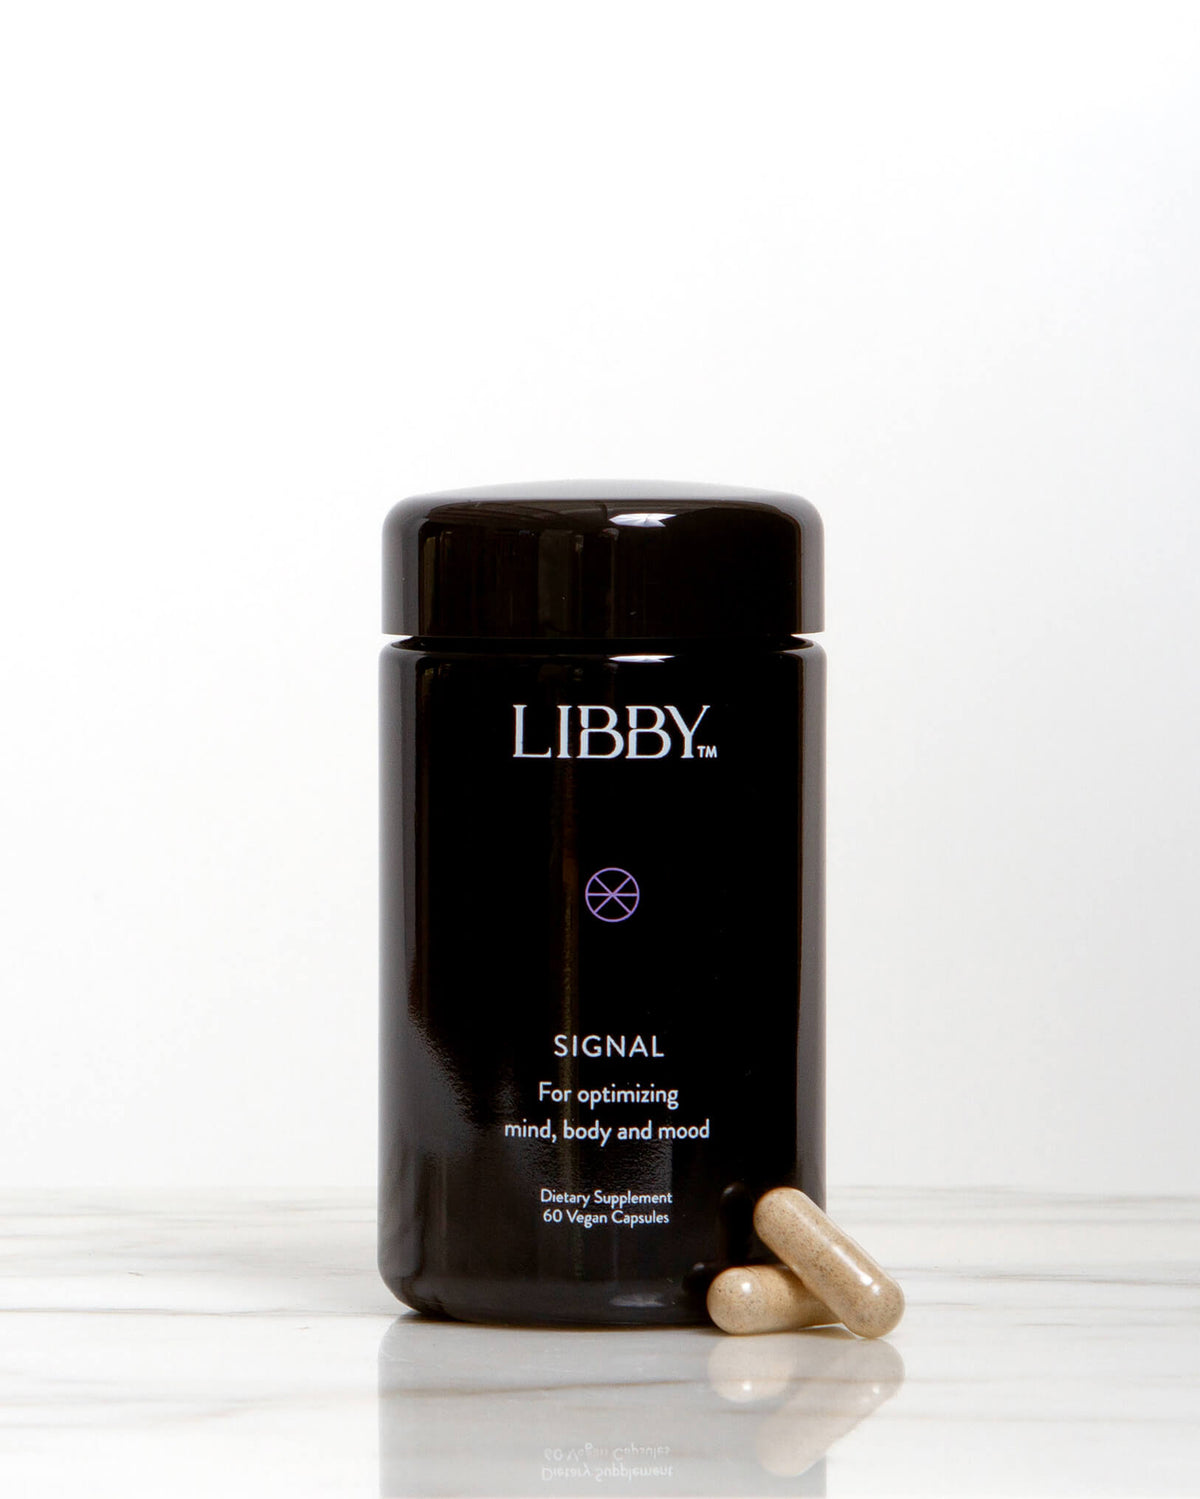 Signal supplement from Libby for optimizing mind, body and mood. Premium black bottle.